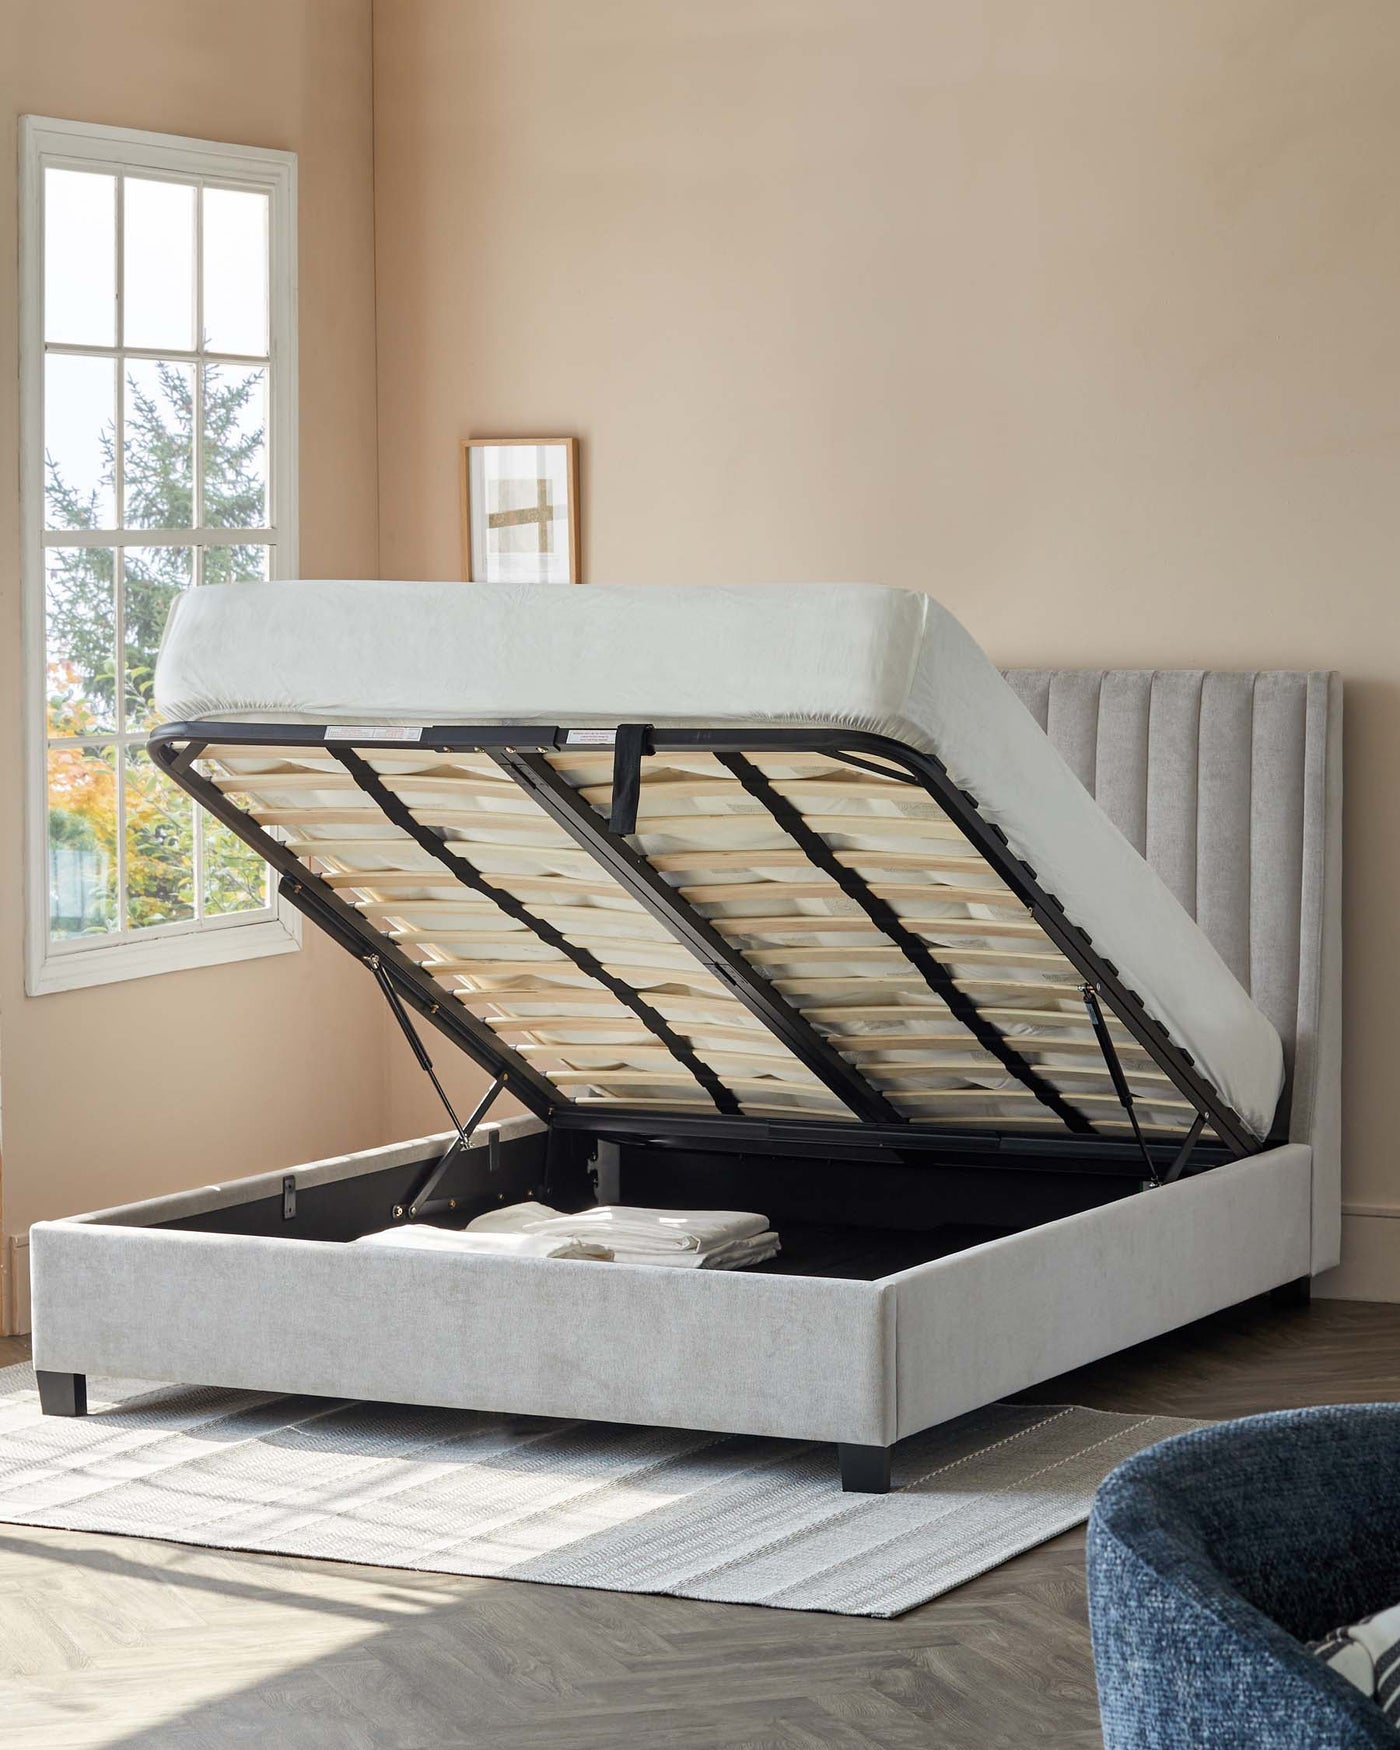 Upholstered light grey storage bed with a tufted headboard and a lifted mattress platform revealing an open storage compartment.